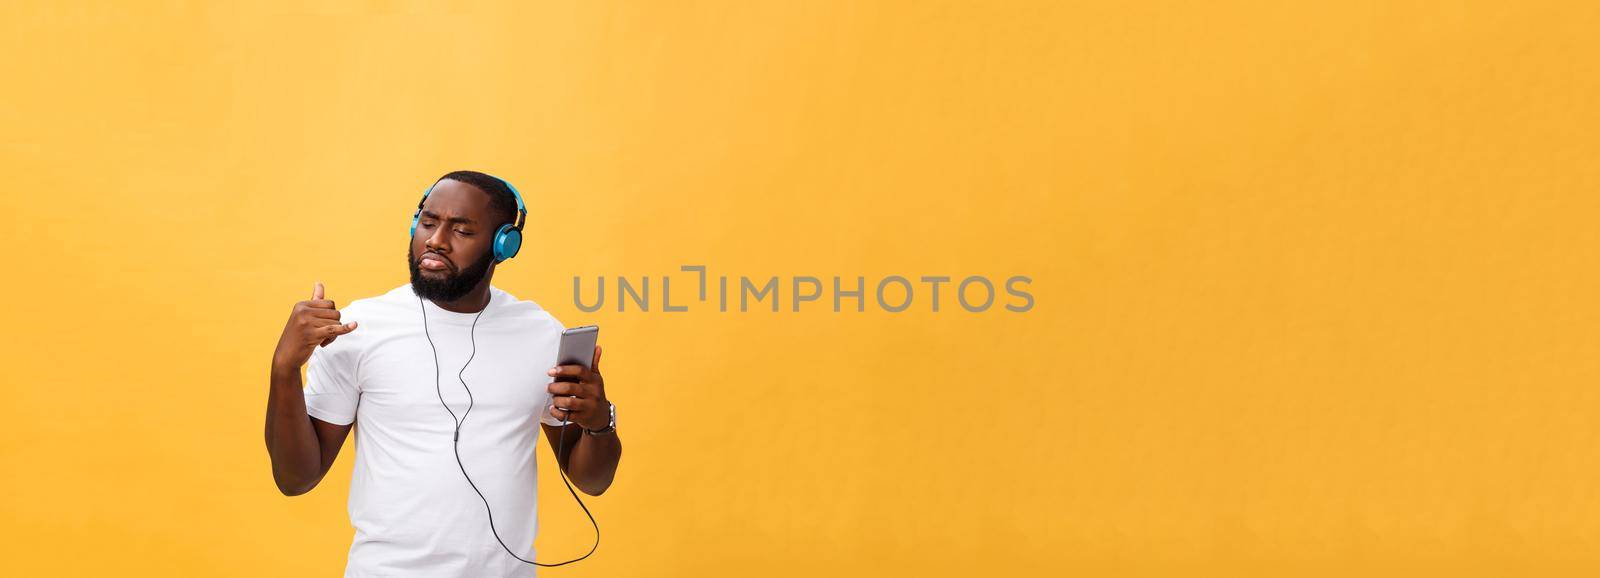 African American man with headphones listen and dance with music. Isolated on yellow background.